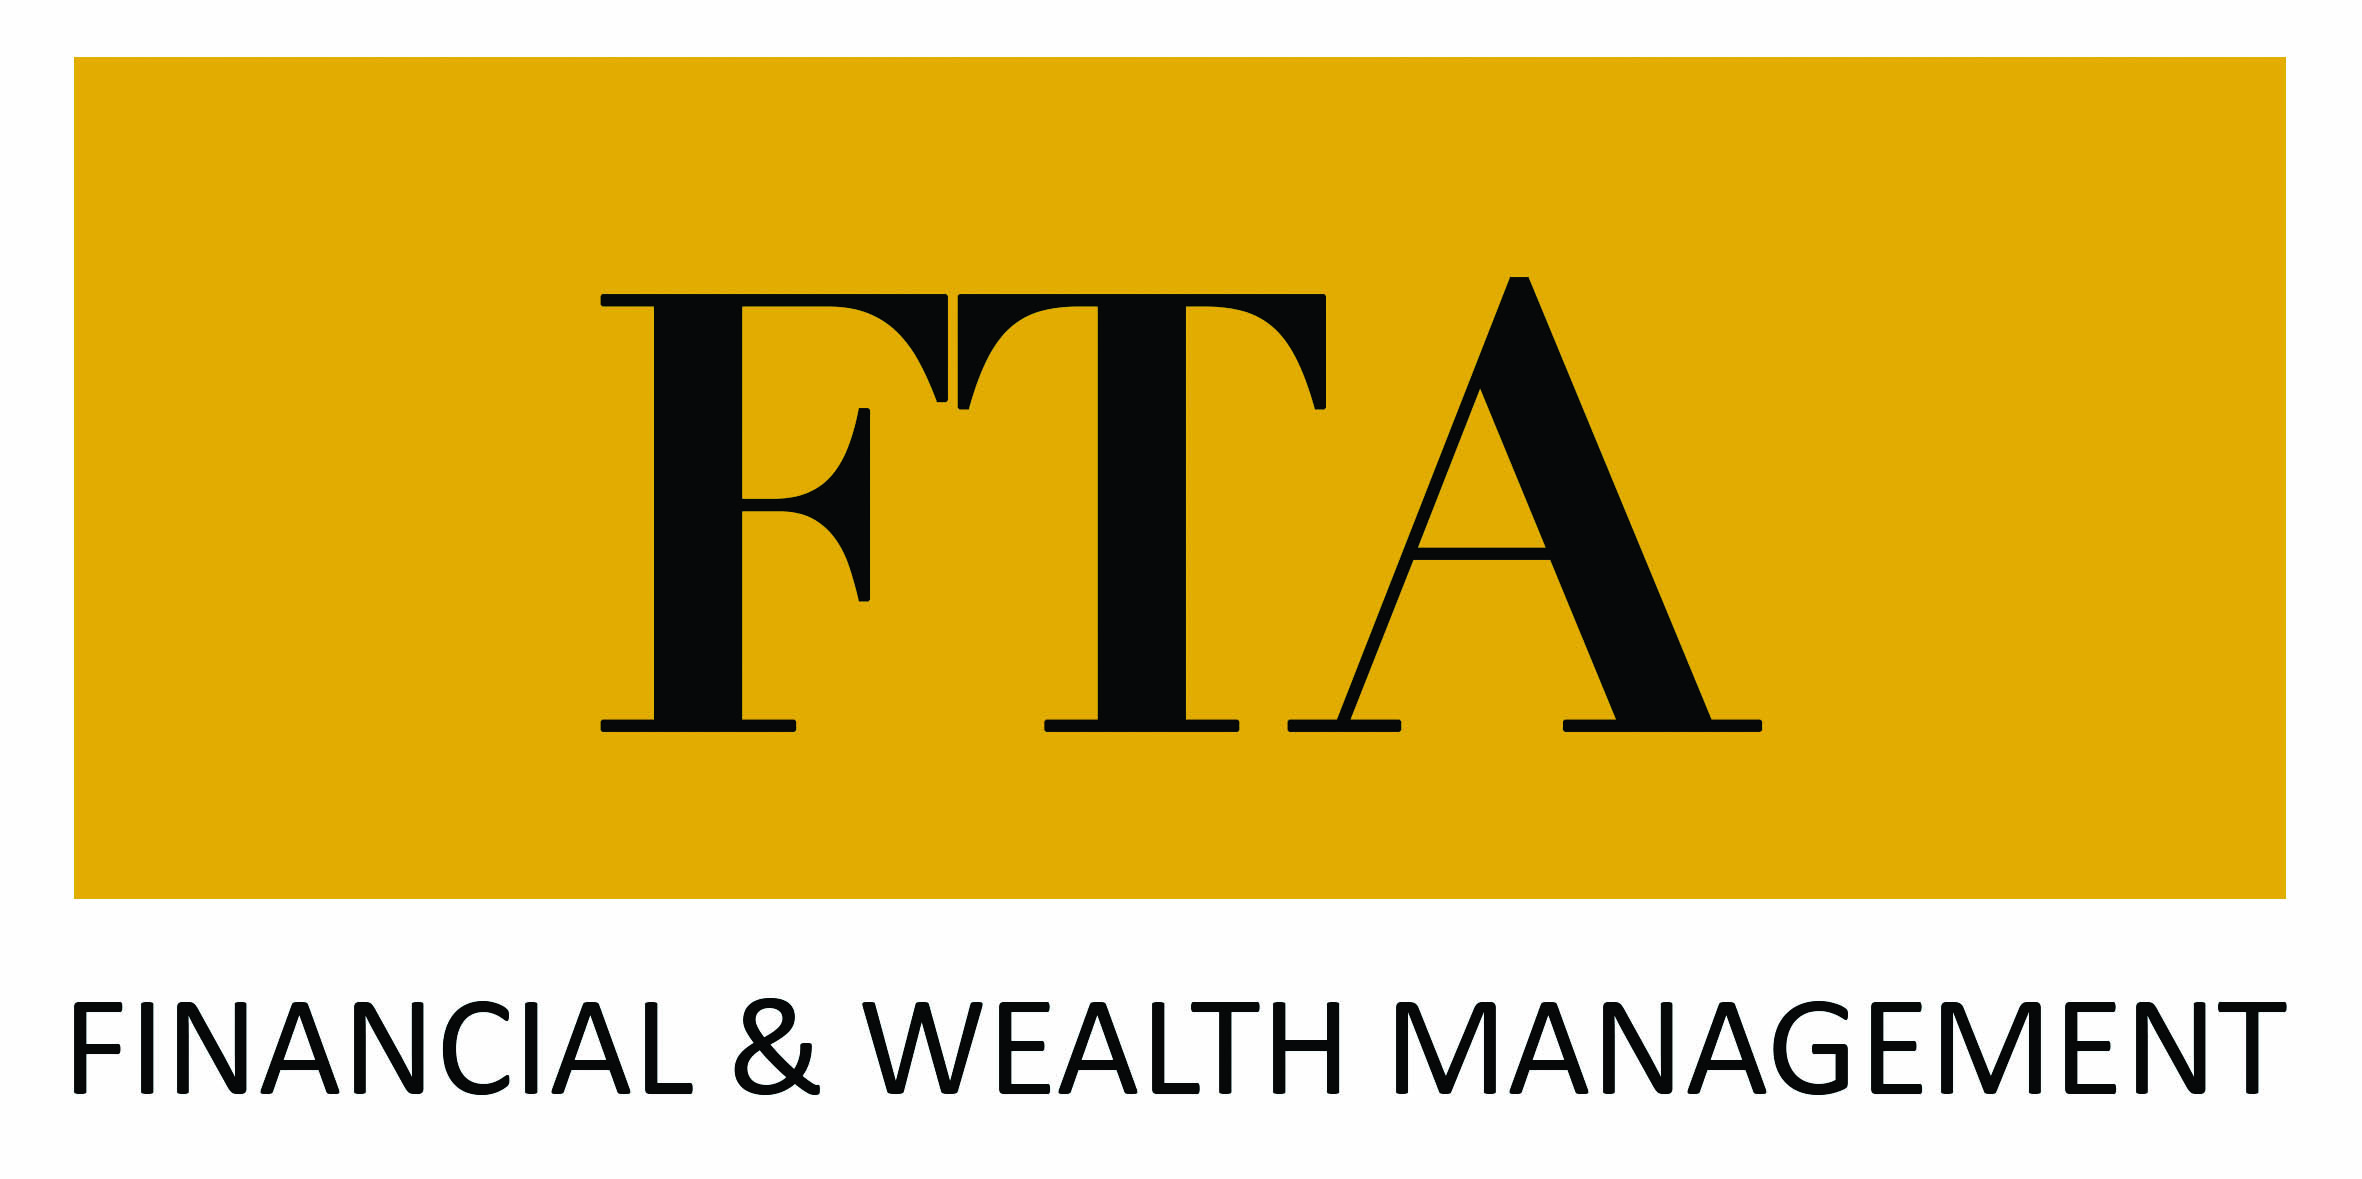 Welcome to MGA Wealth Management